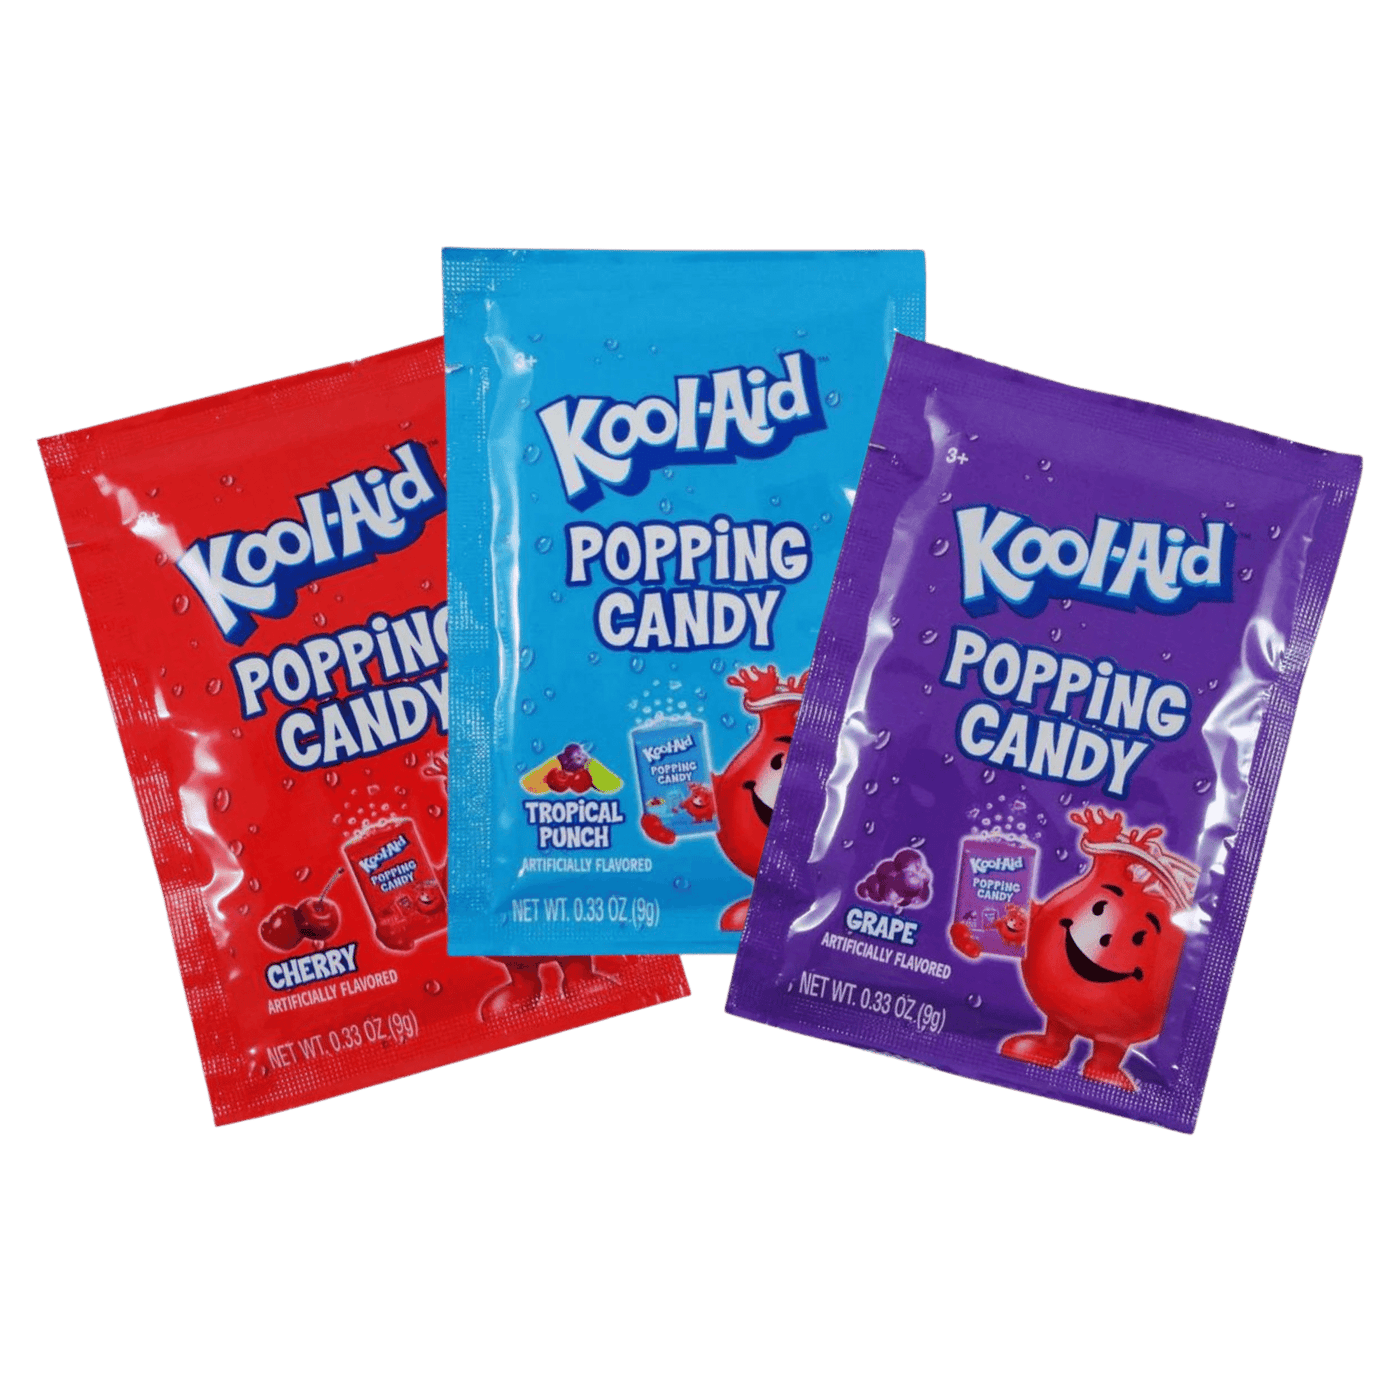 Kool-Aid Popping candy